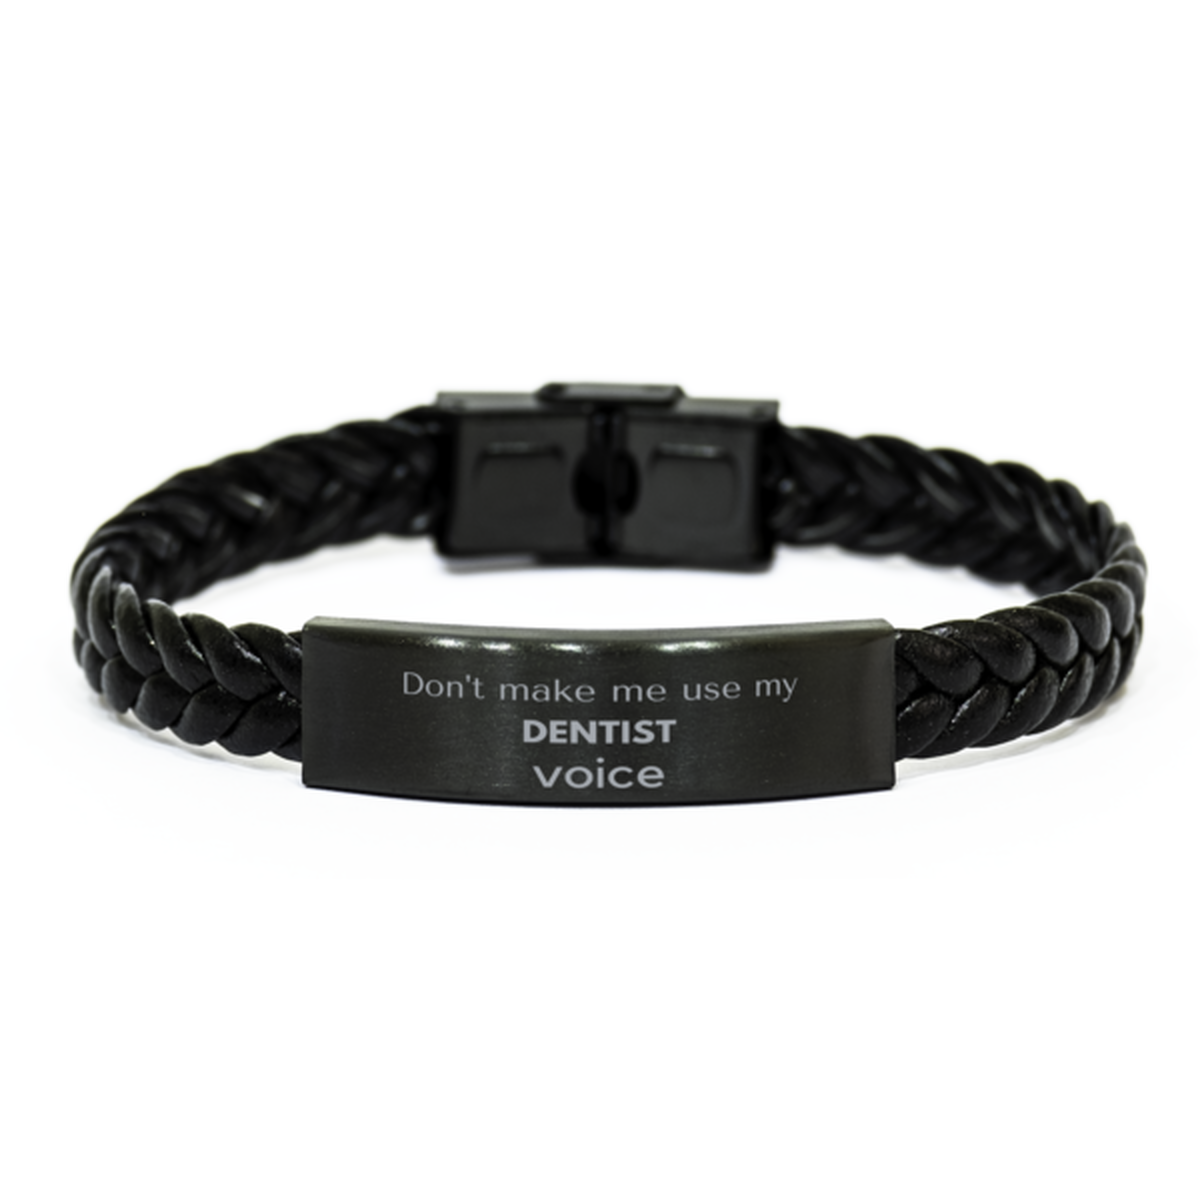 Don't make me use my Dentist voice, Sarcasm Dentist Gifts, Christmas Dentist Braided Leather Bracelet Birthday Unique Gifts For Dentist Coworkers, Men, Women, Colleague, Friends